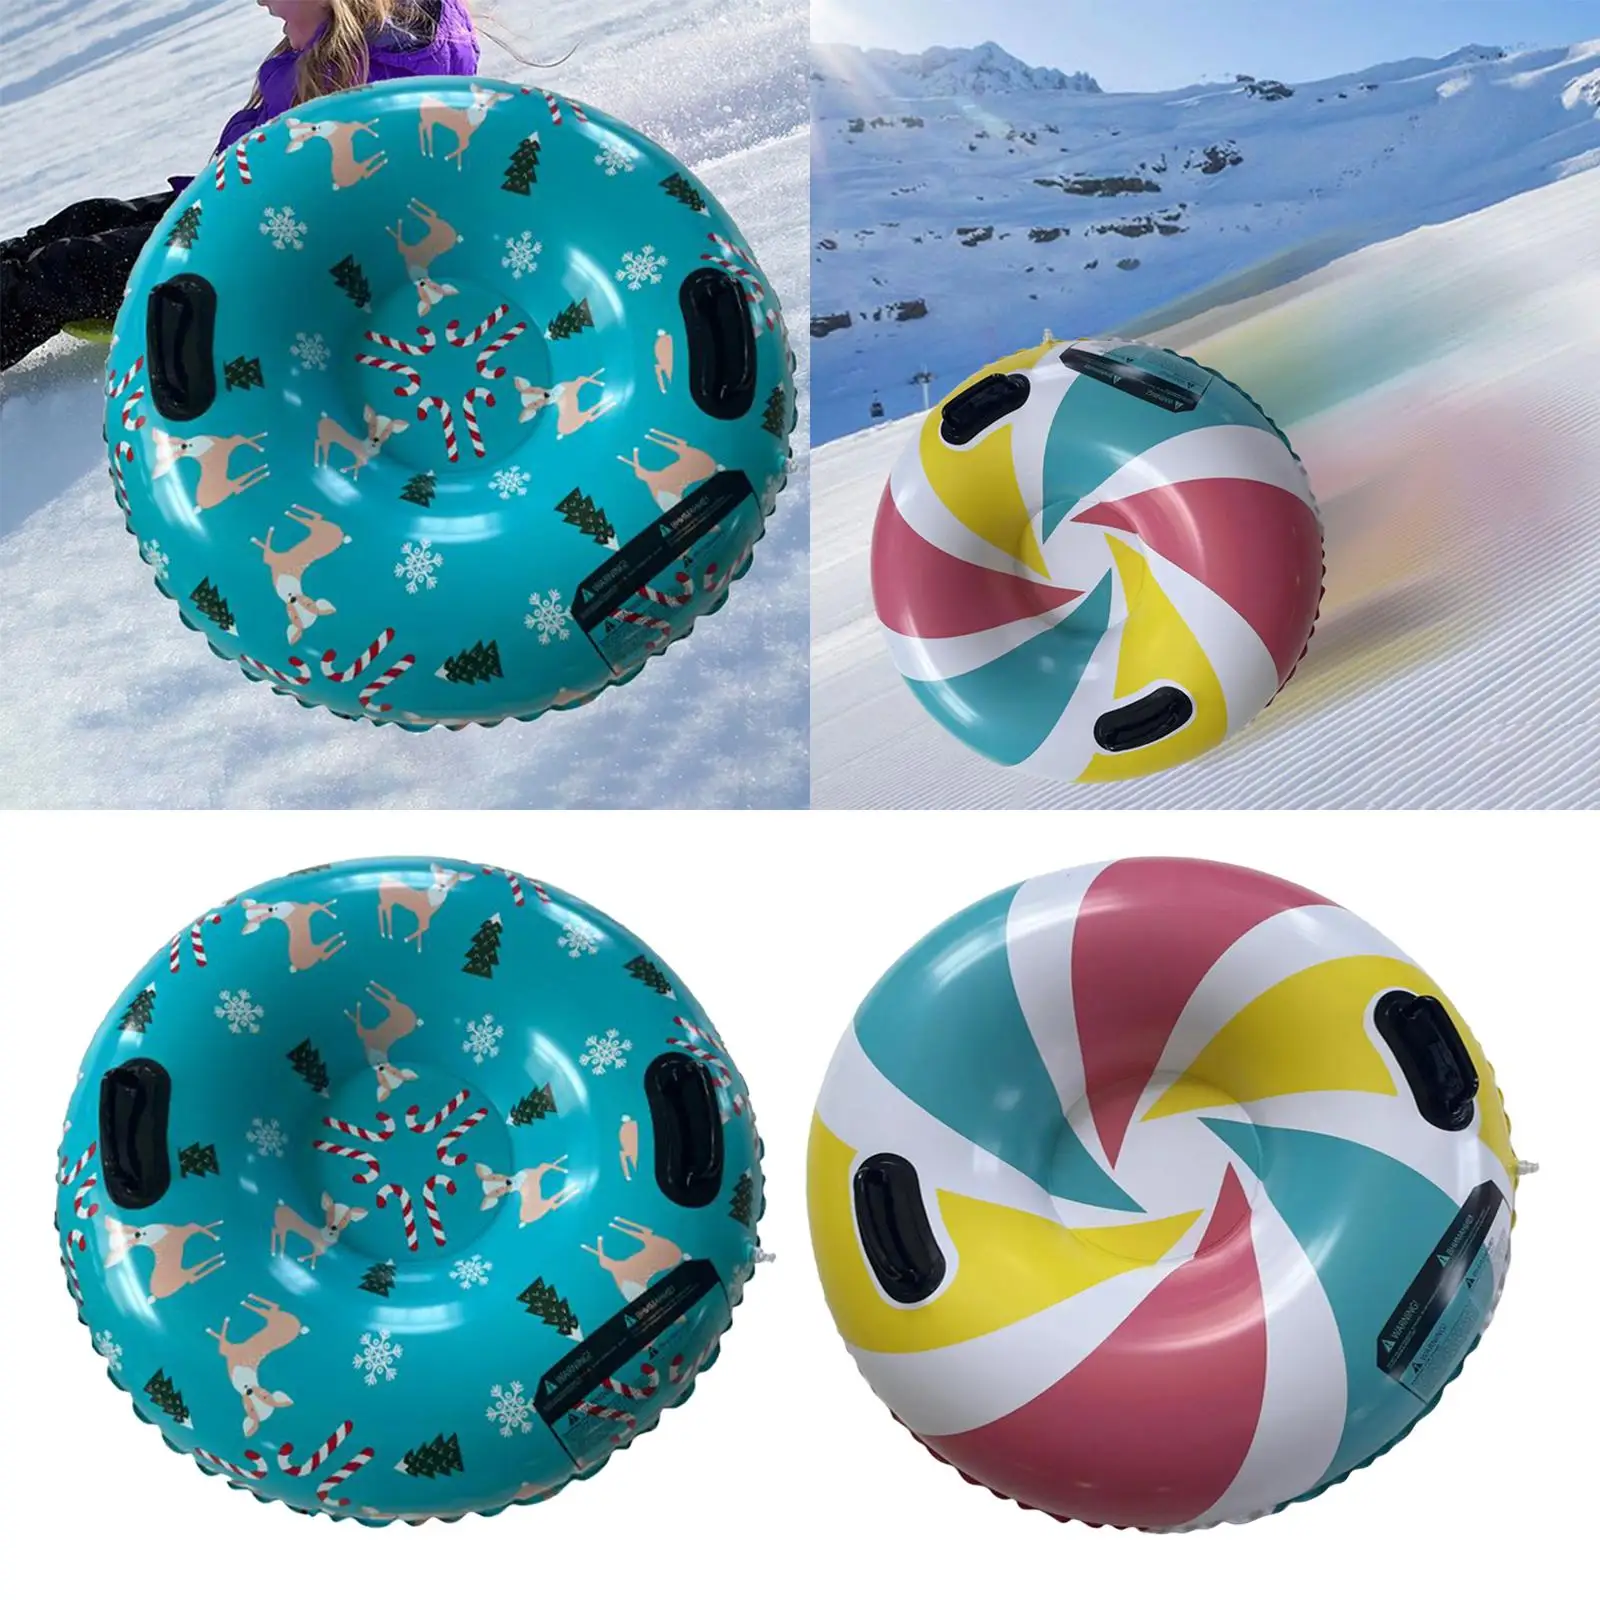 Sturdy winter snow tube easy to carry Diameter 91 cm Snow toys with thick bottom